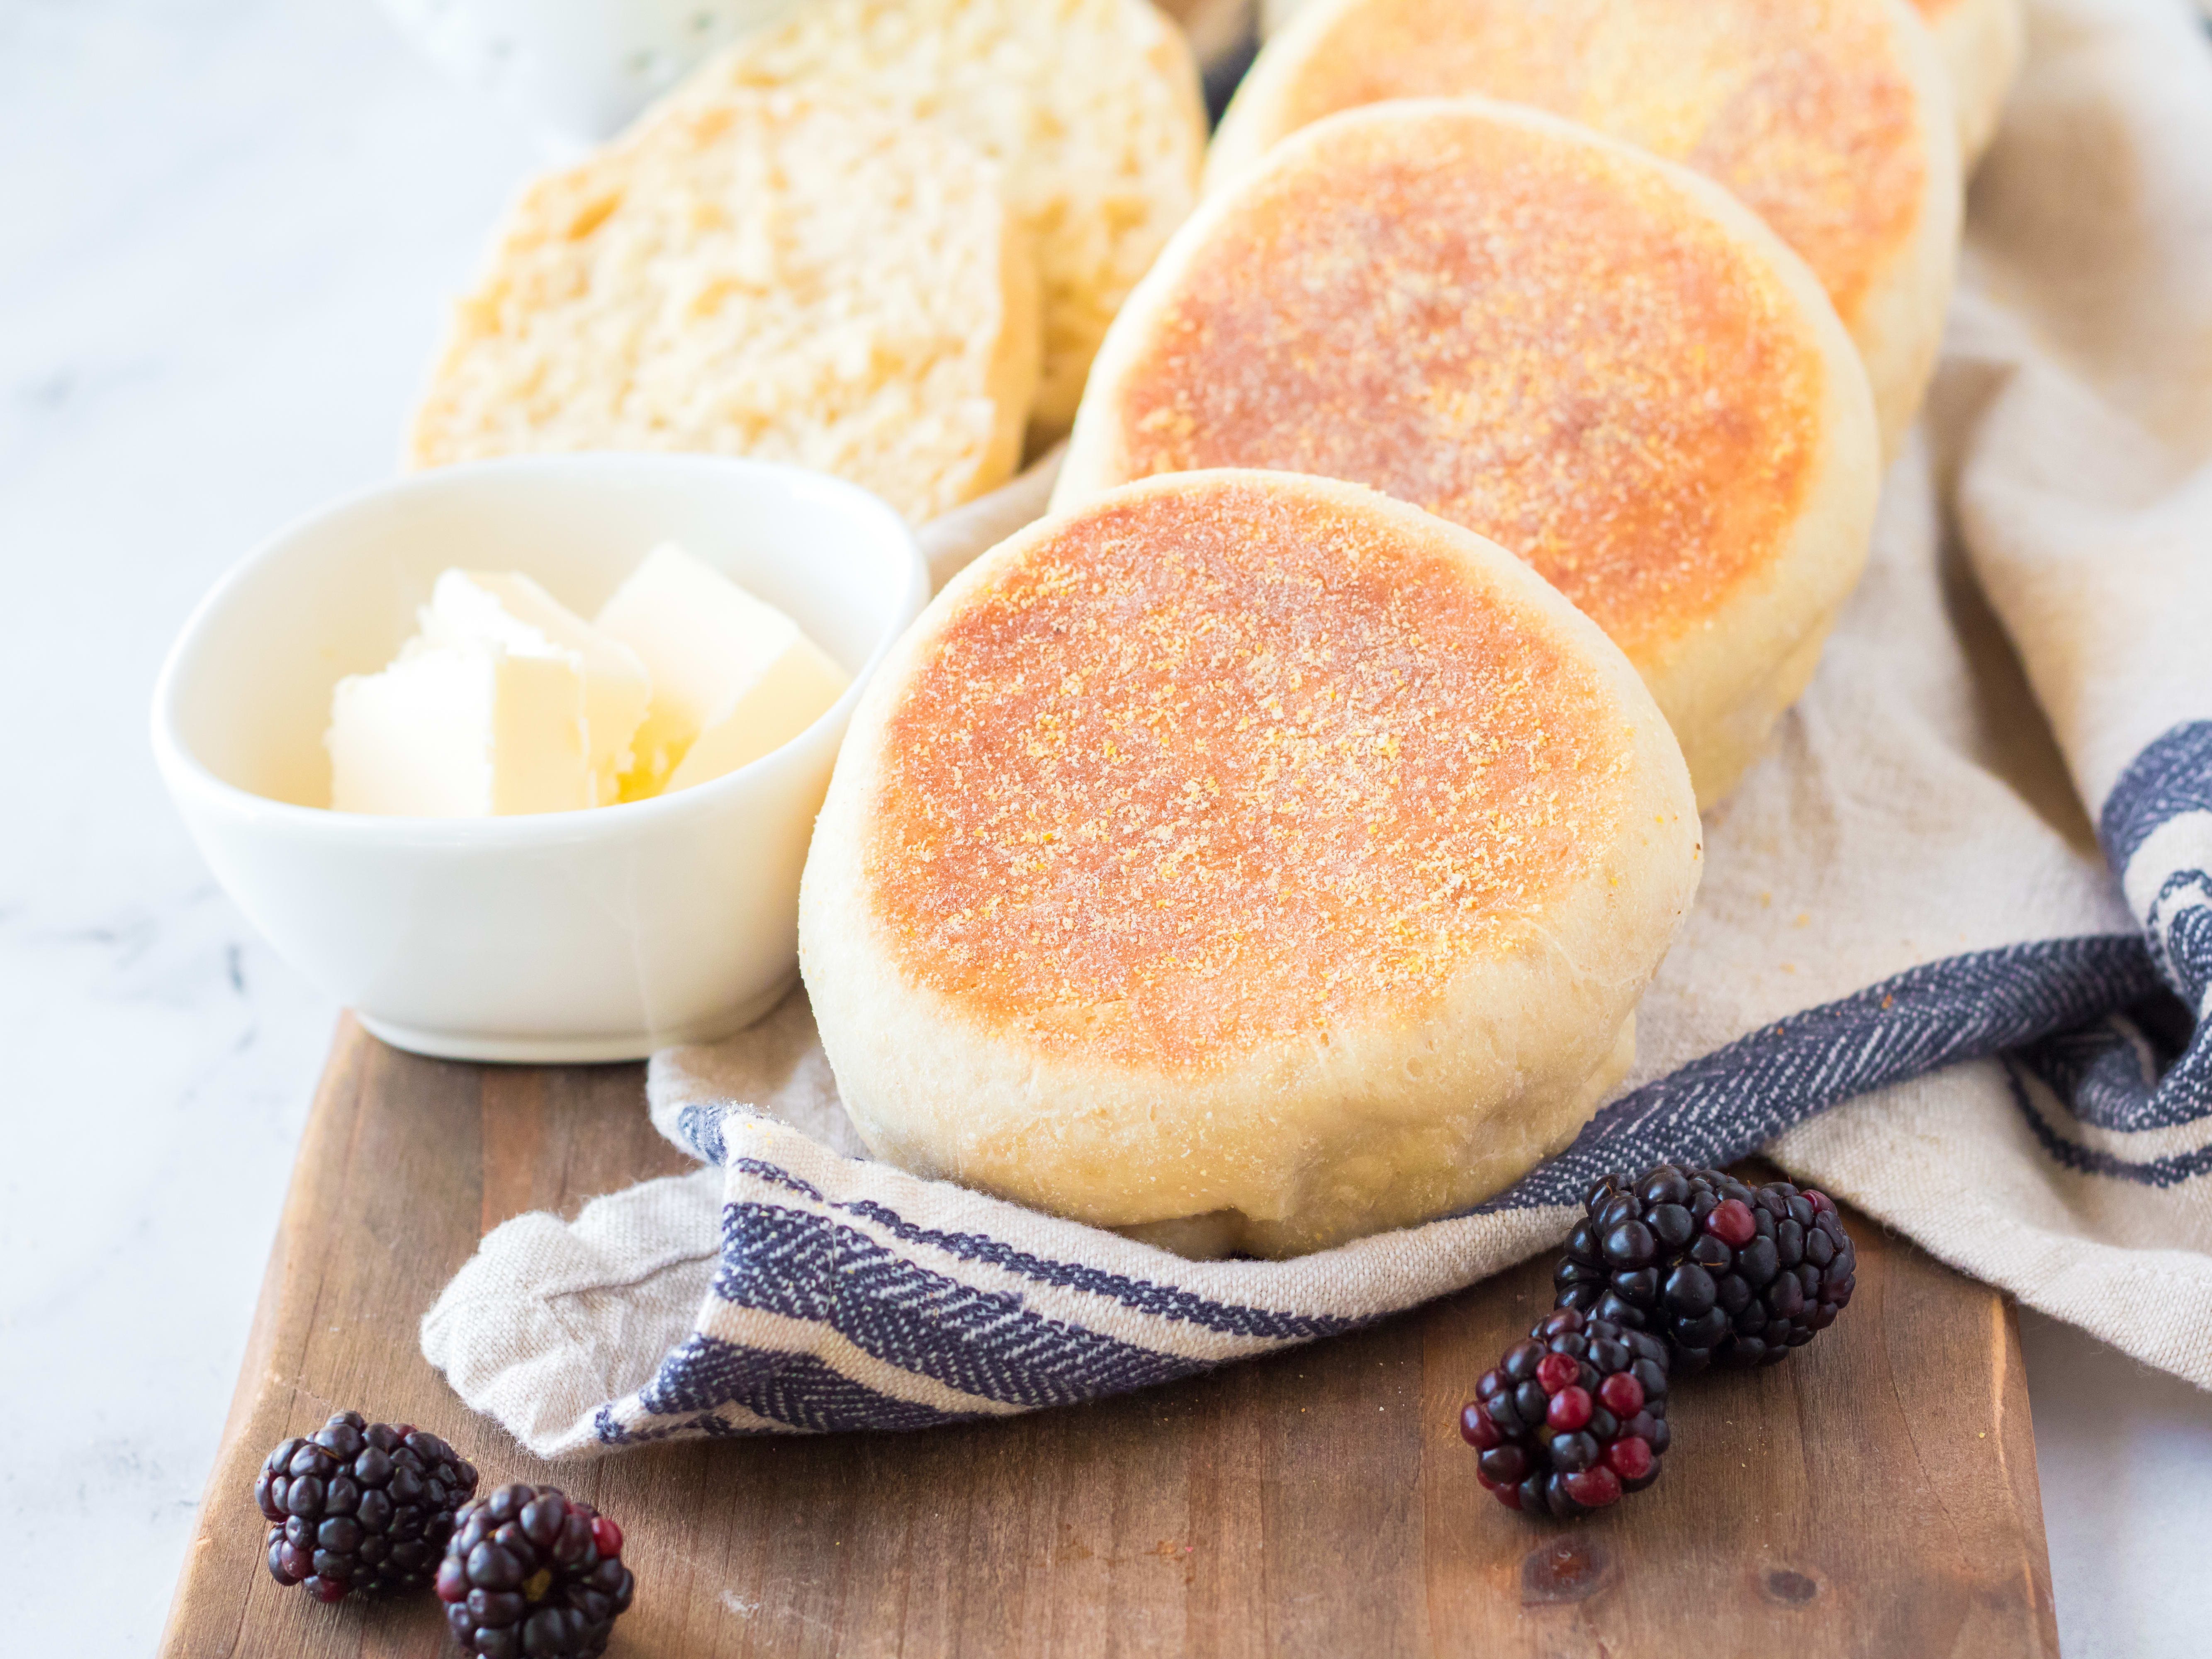 How to Make the Best English Muffins You've Ever Had